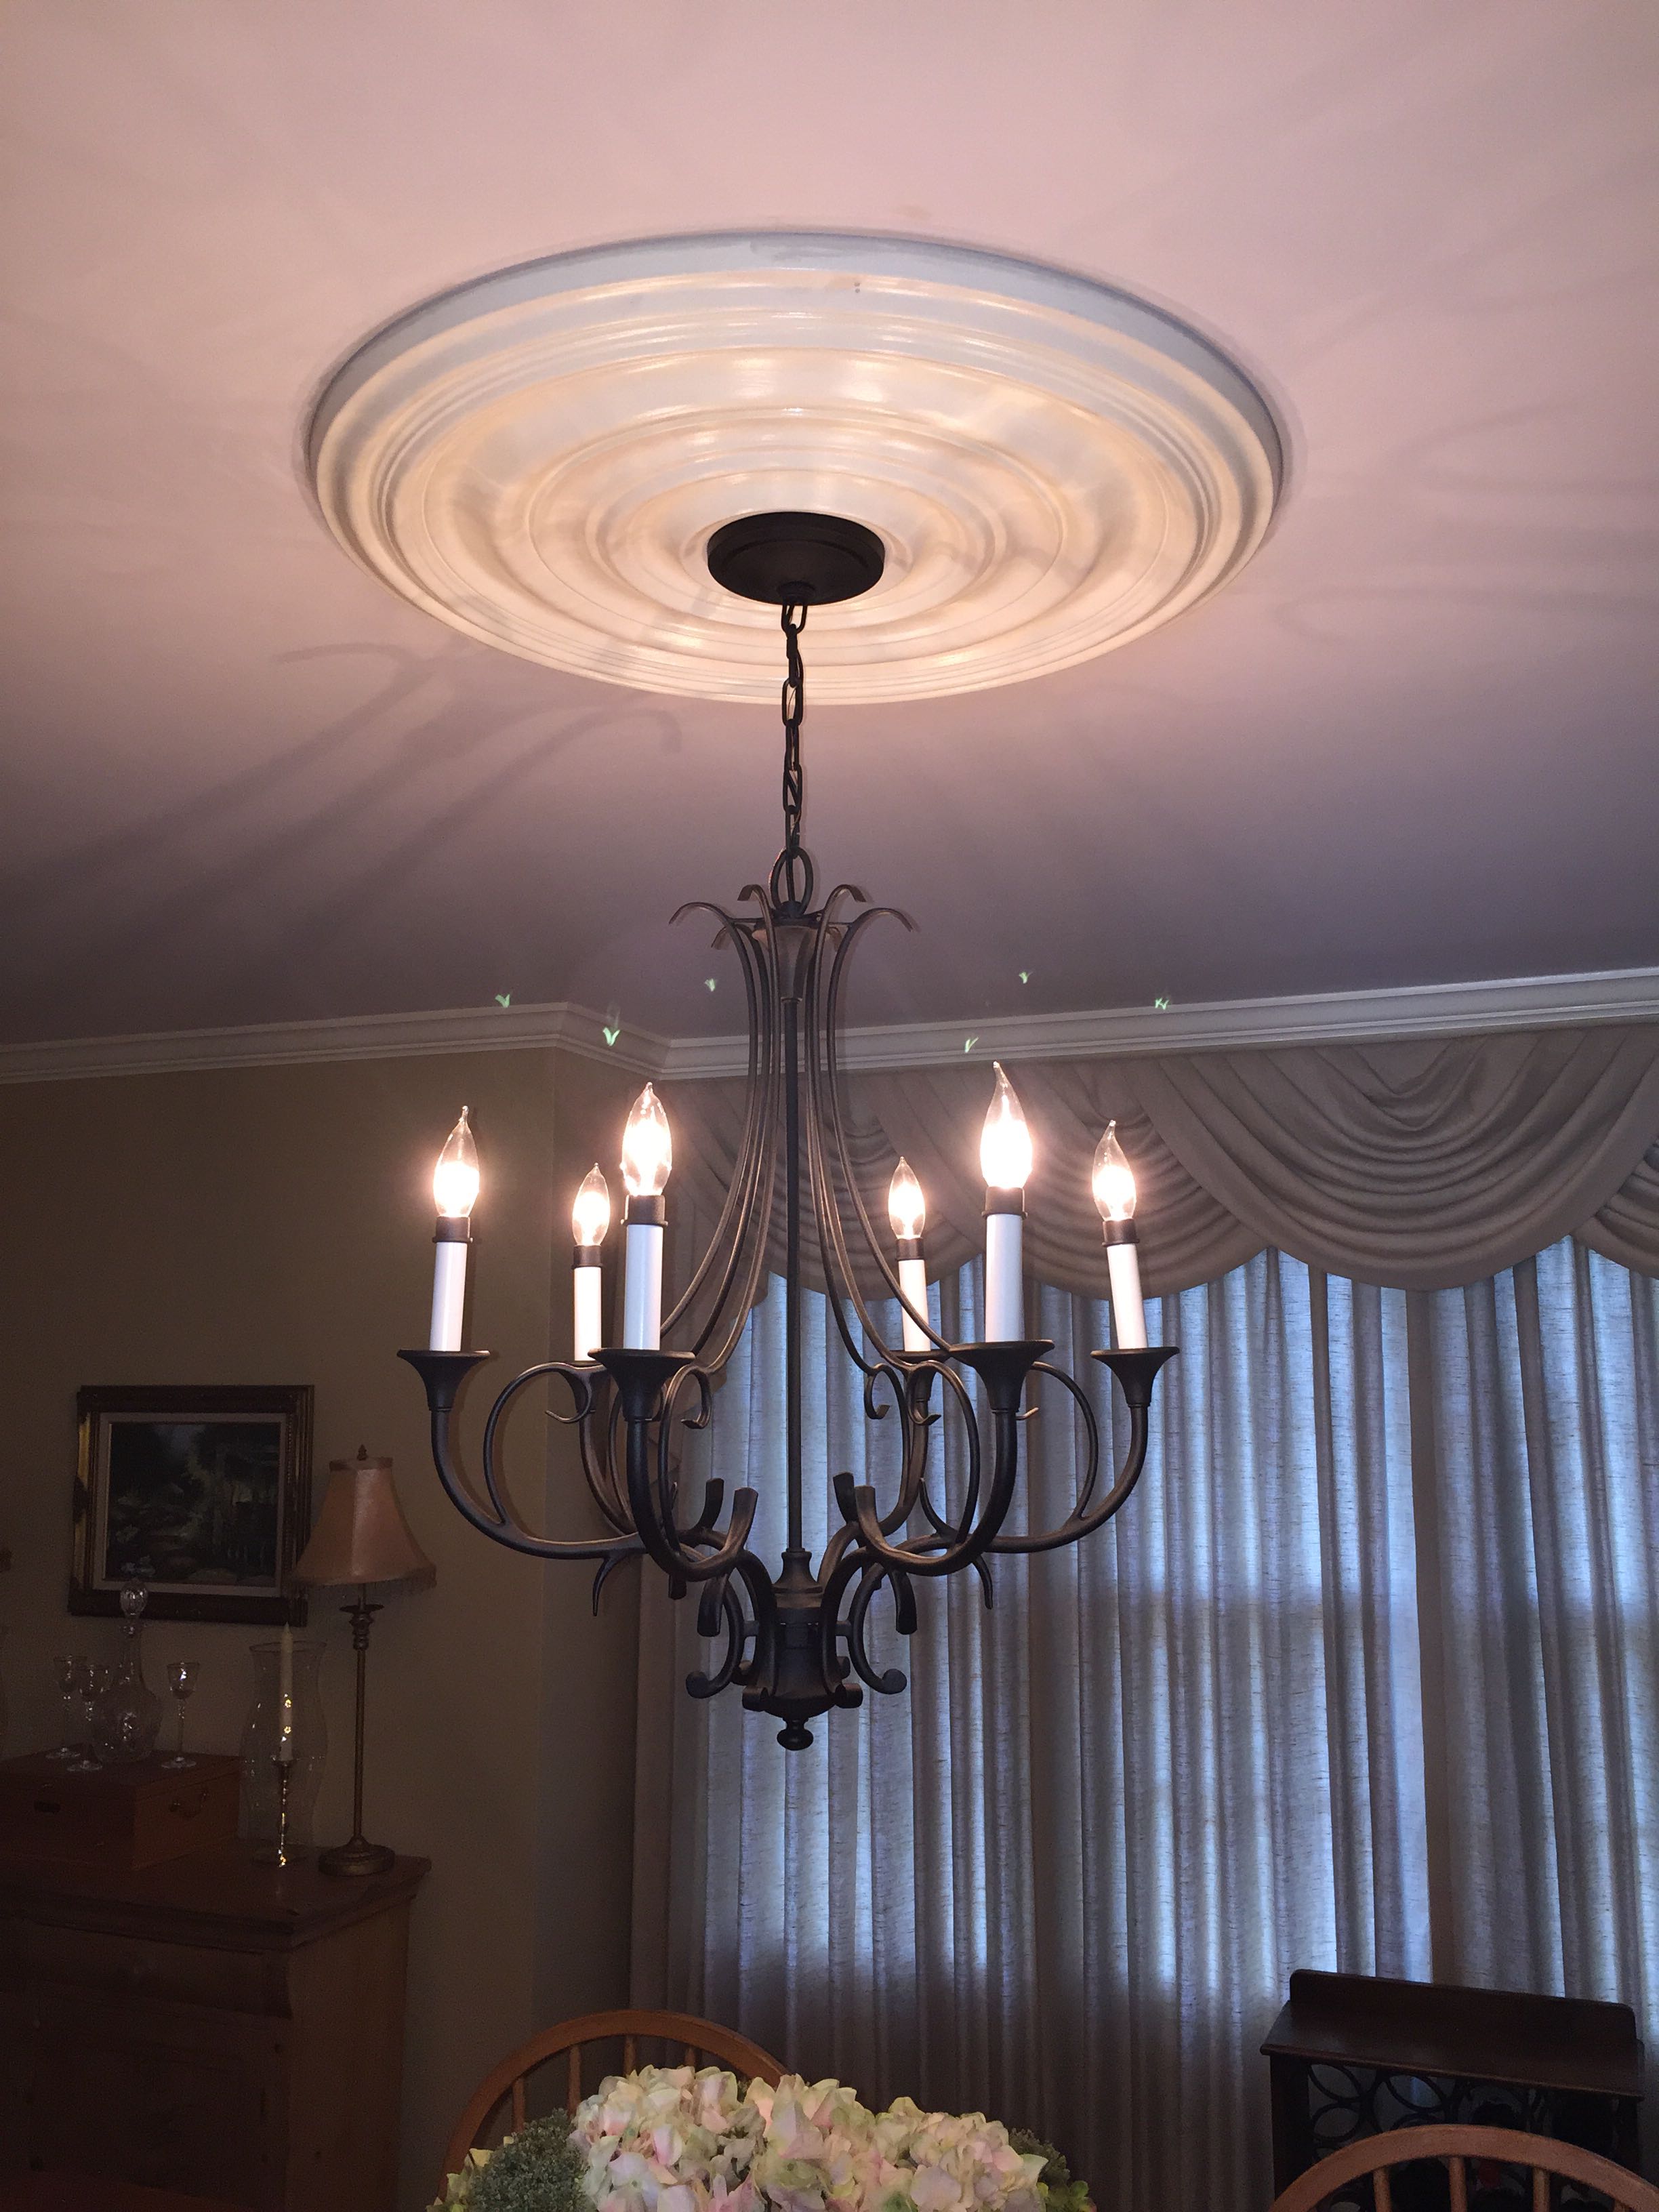 How To Choose Ceiling Medallions, How To Choose A Ceiling Medallion For Chandelier